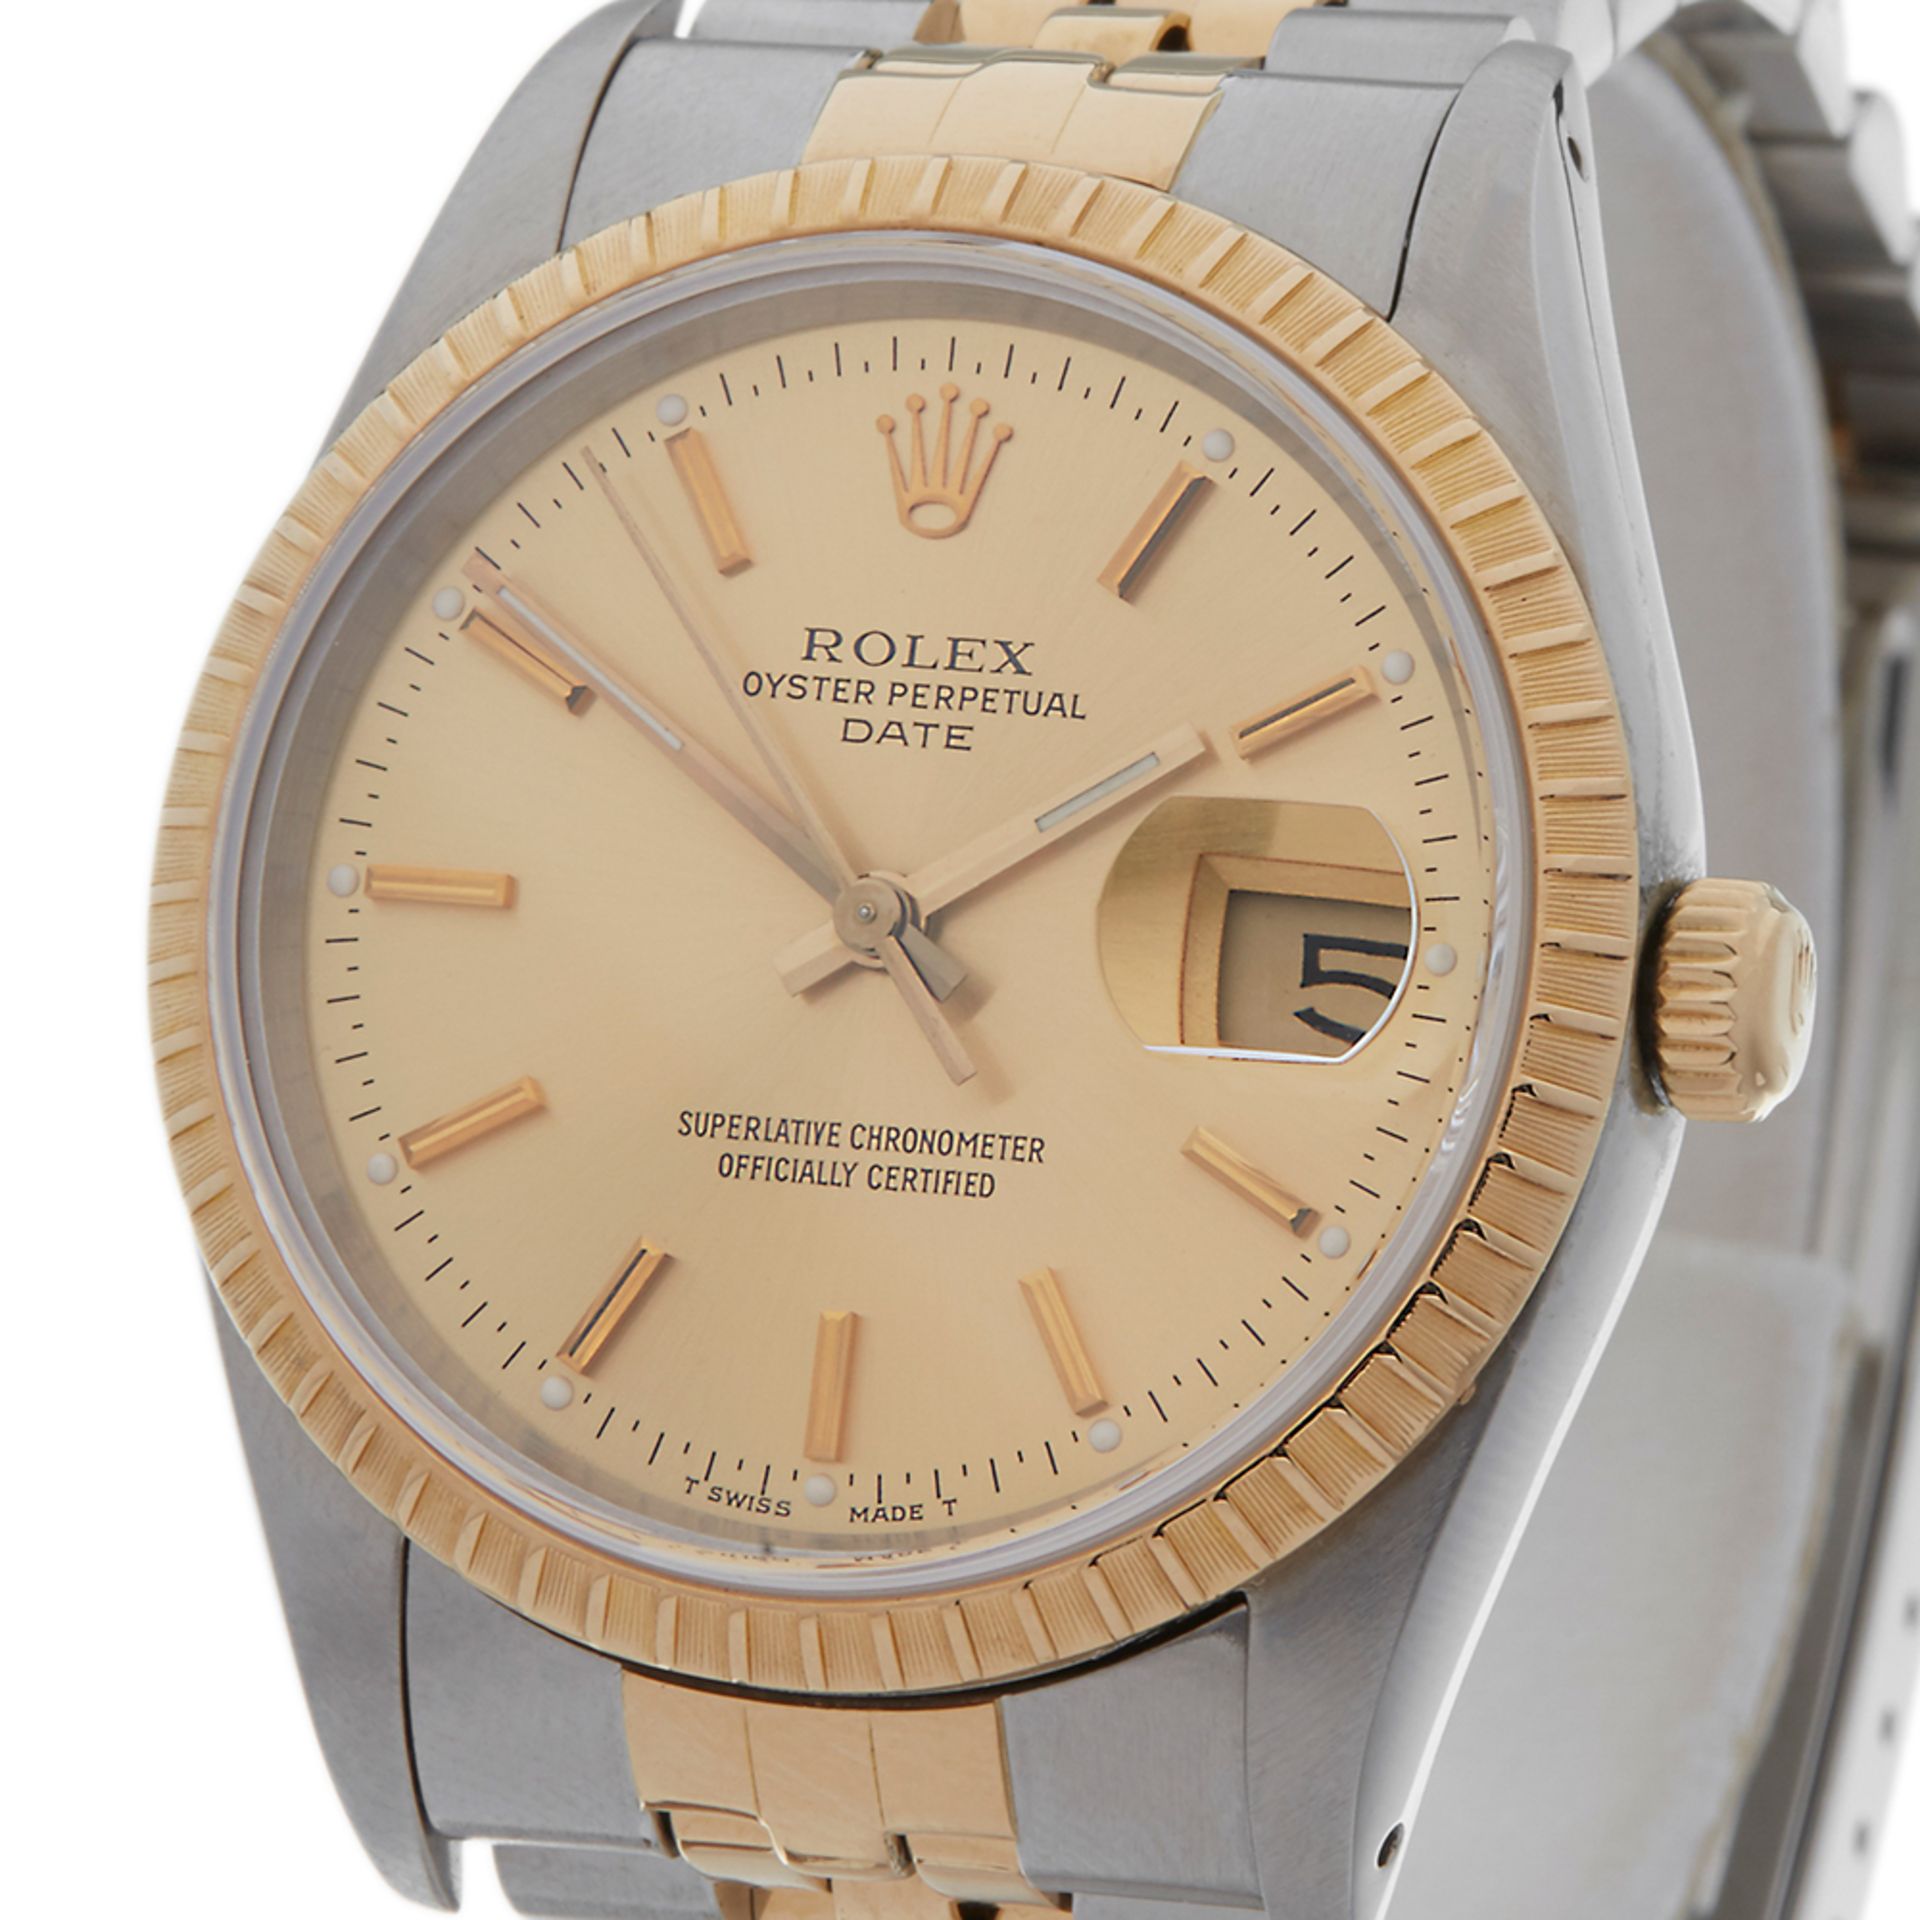 Oyster Perpetual Date 36mm Stainless Steel & 18k Yellow Gold - 15233 - Image 3 of 8